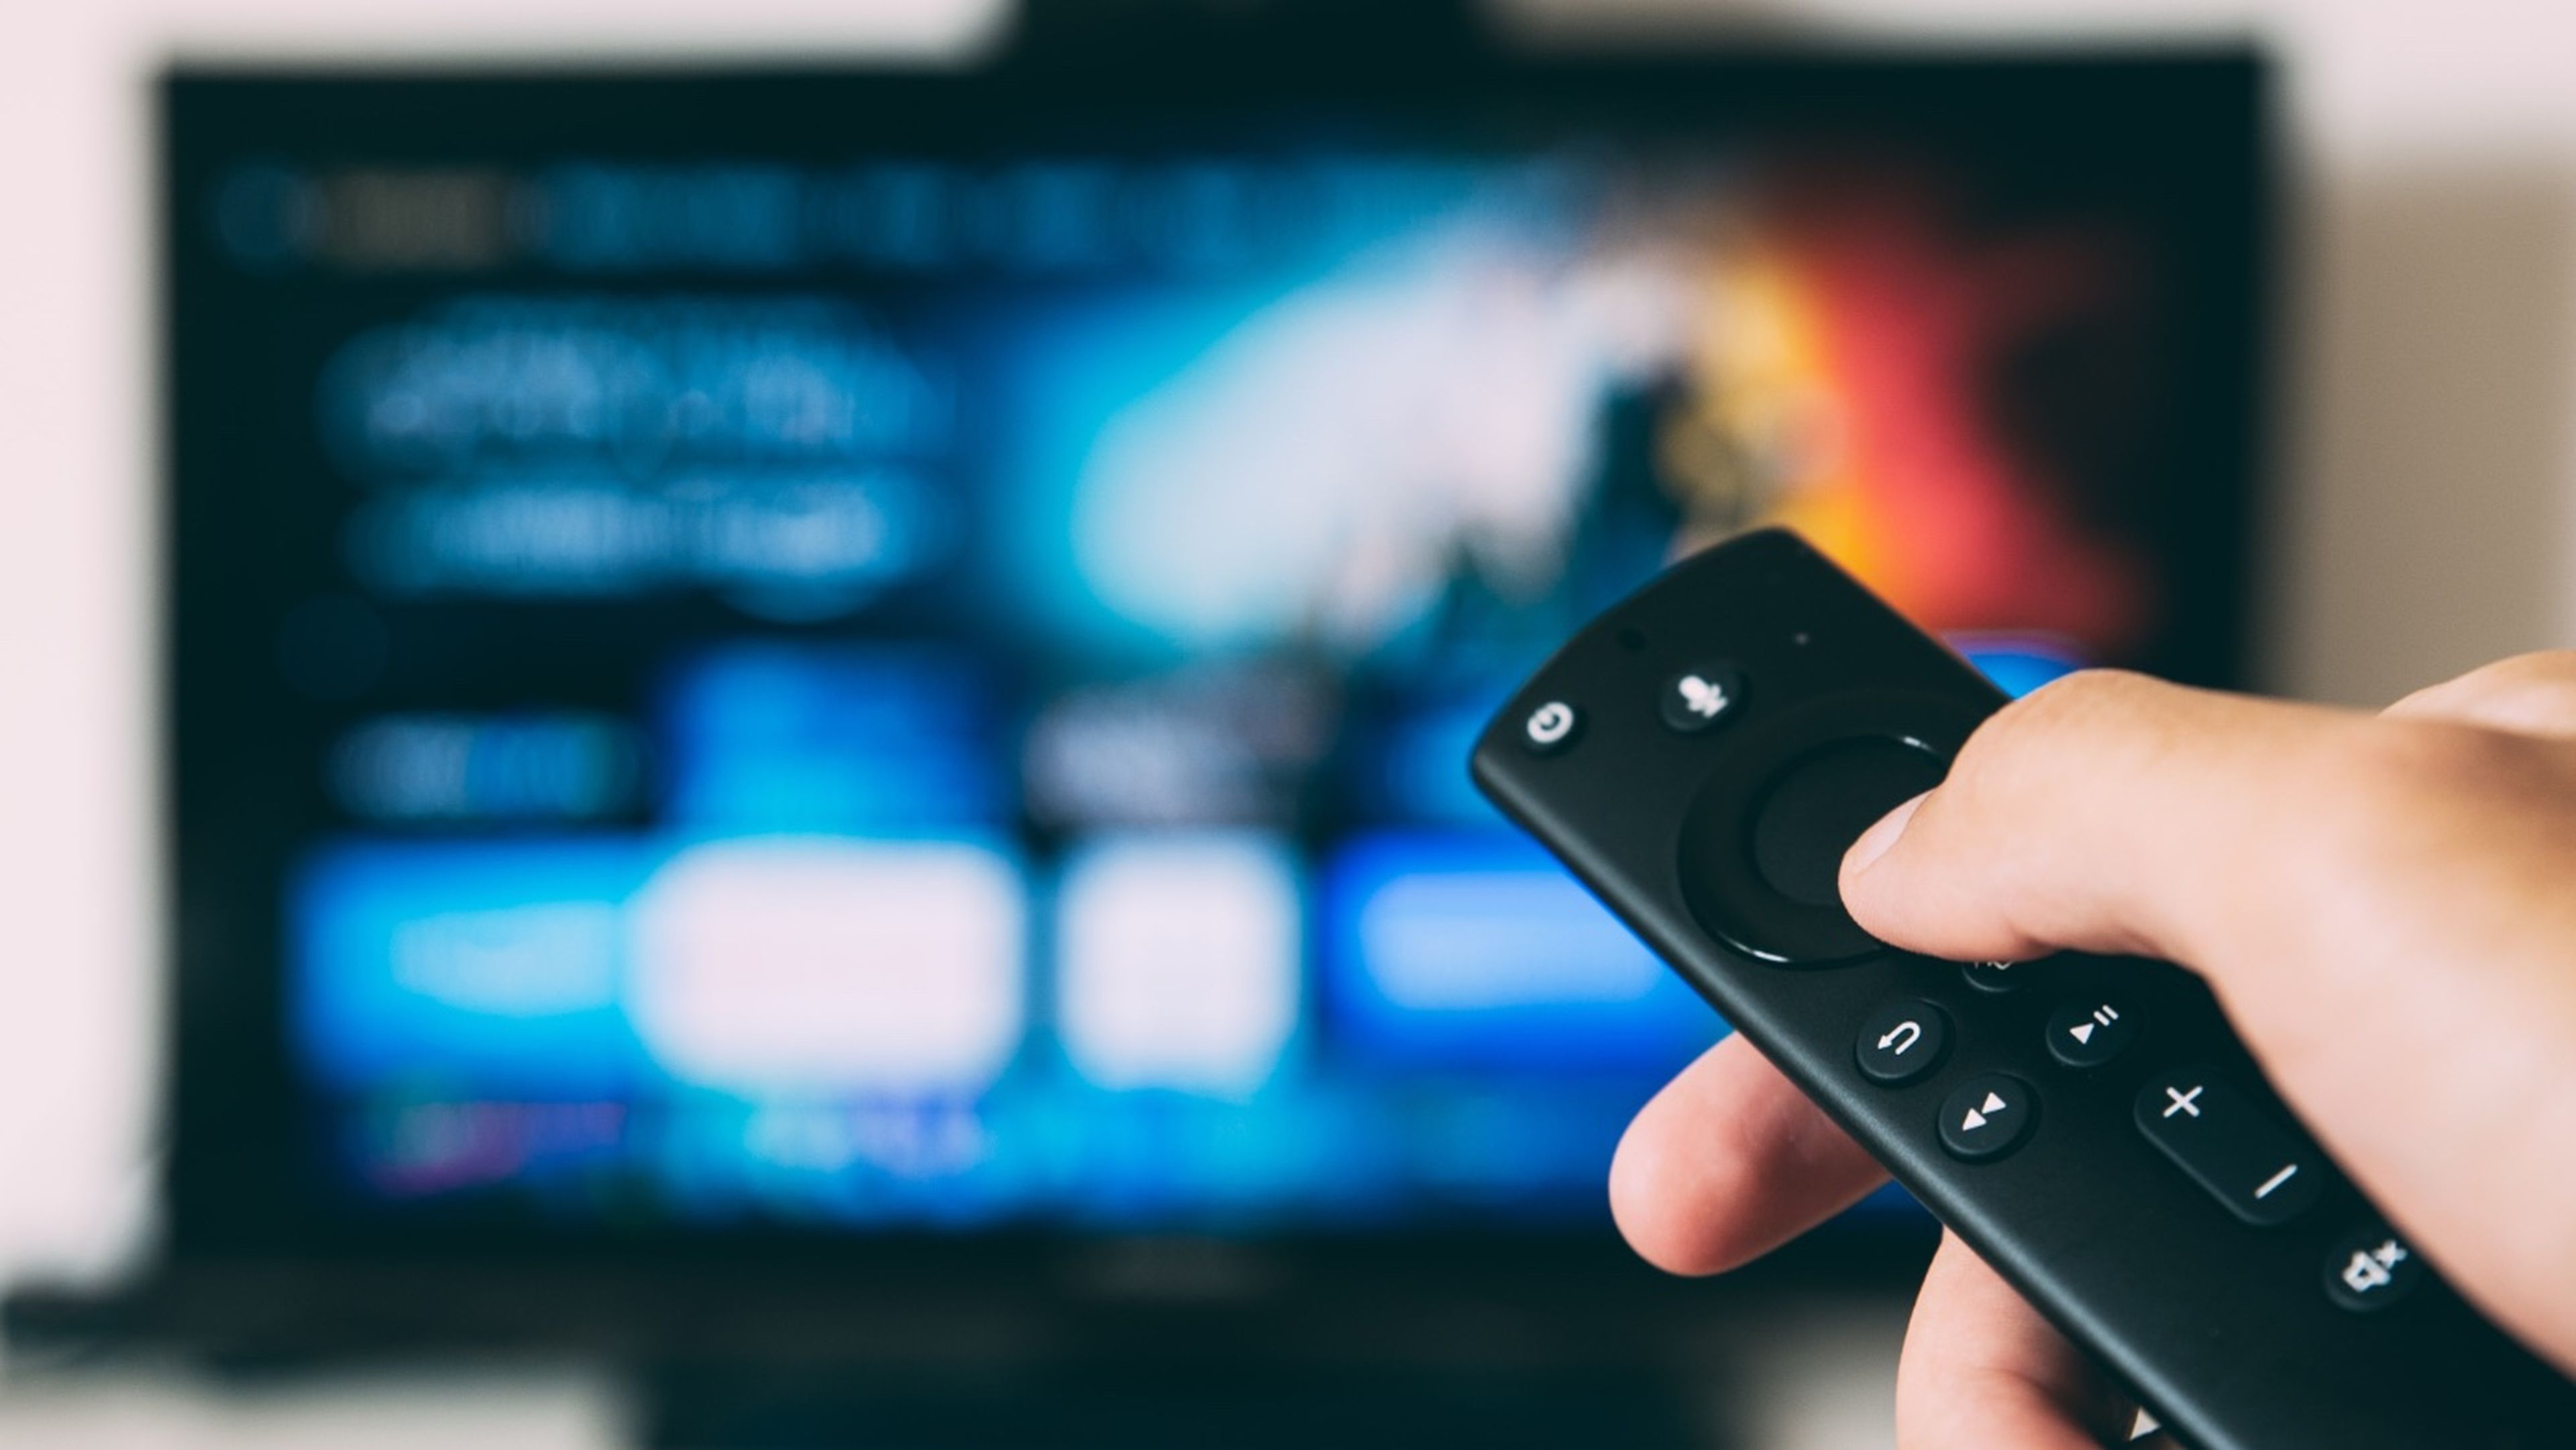 TV with Amazon Fire TV Stick Remote